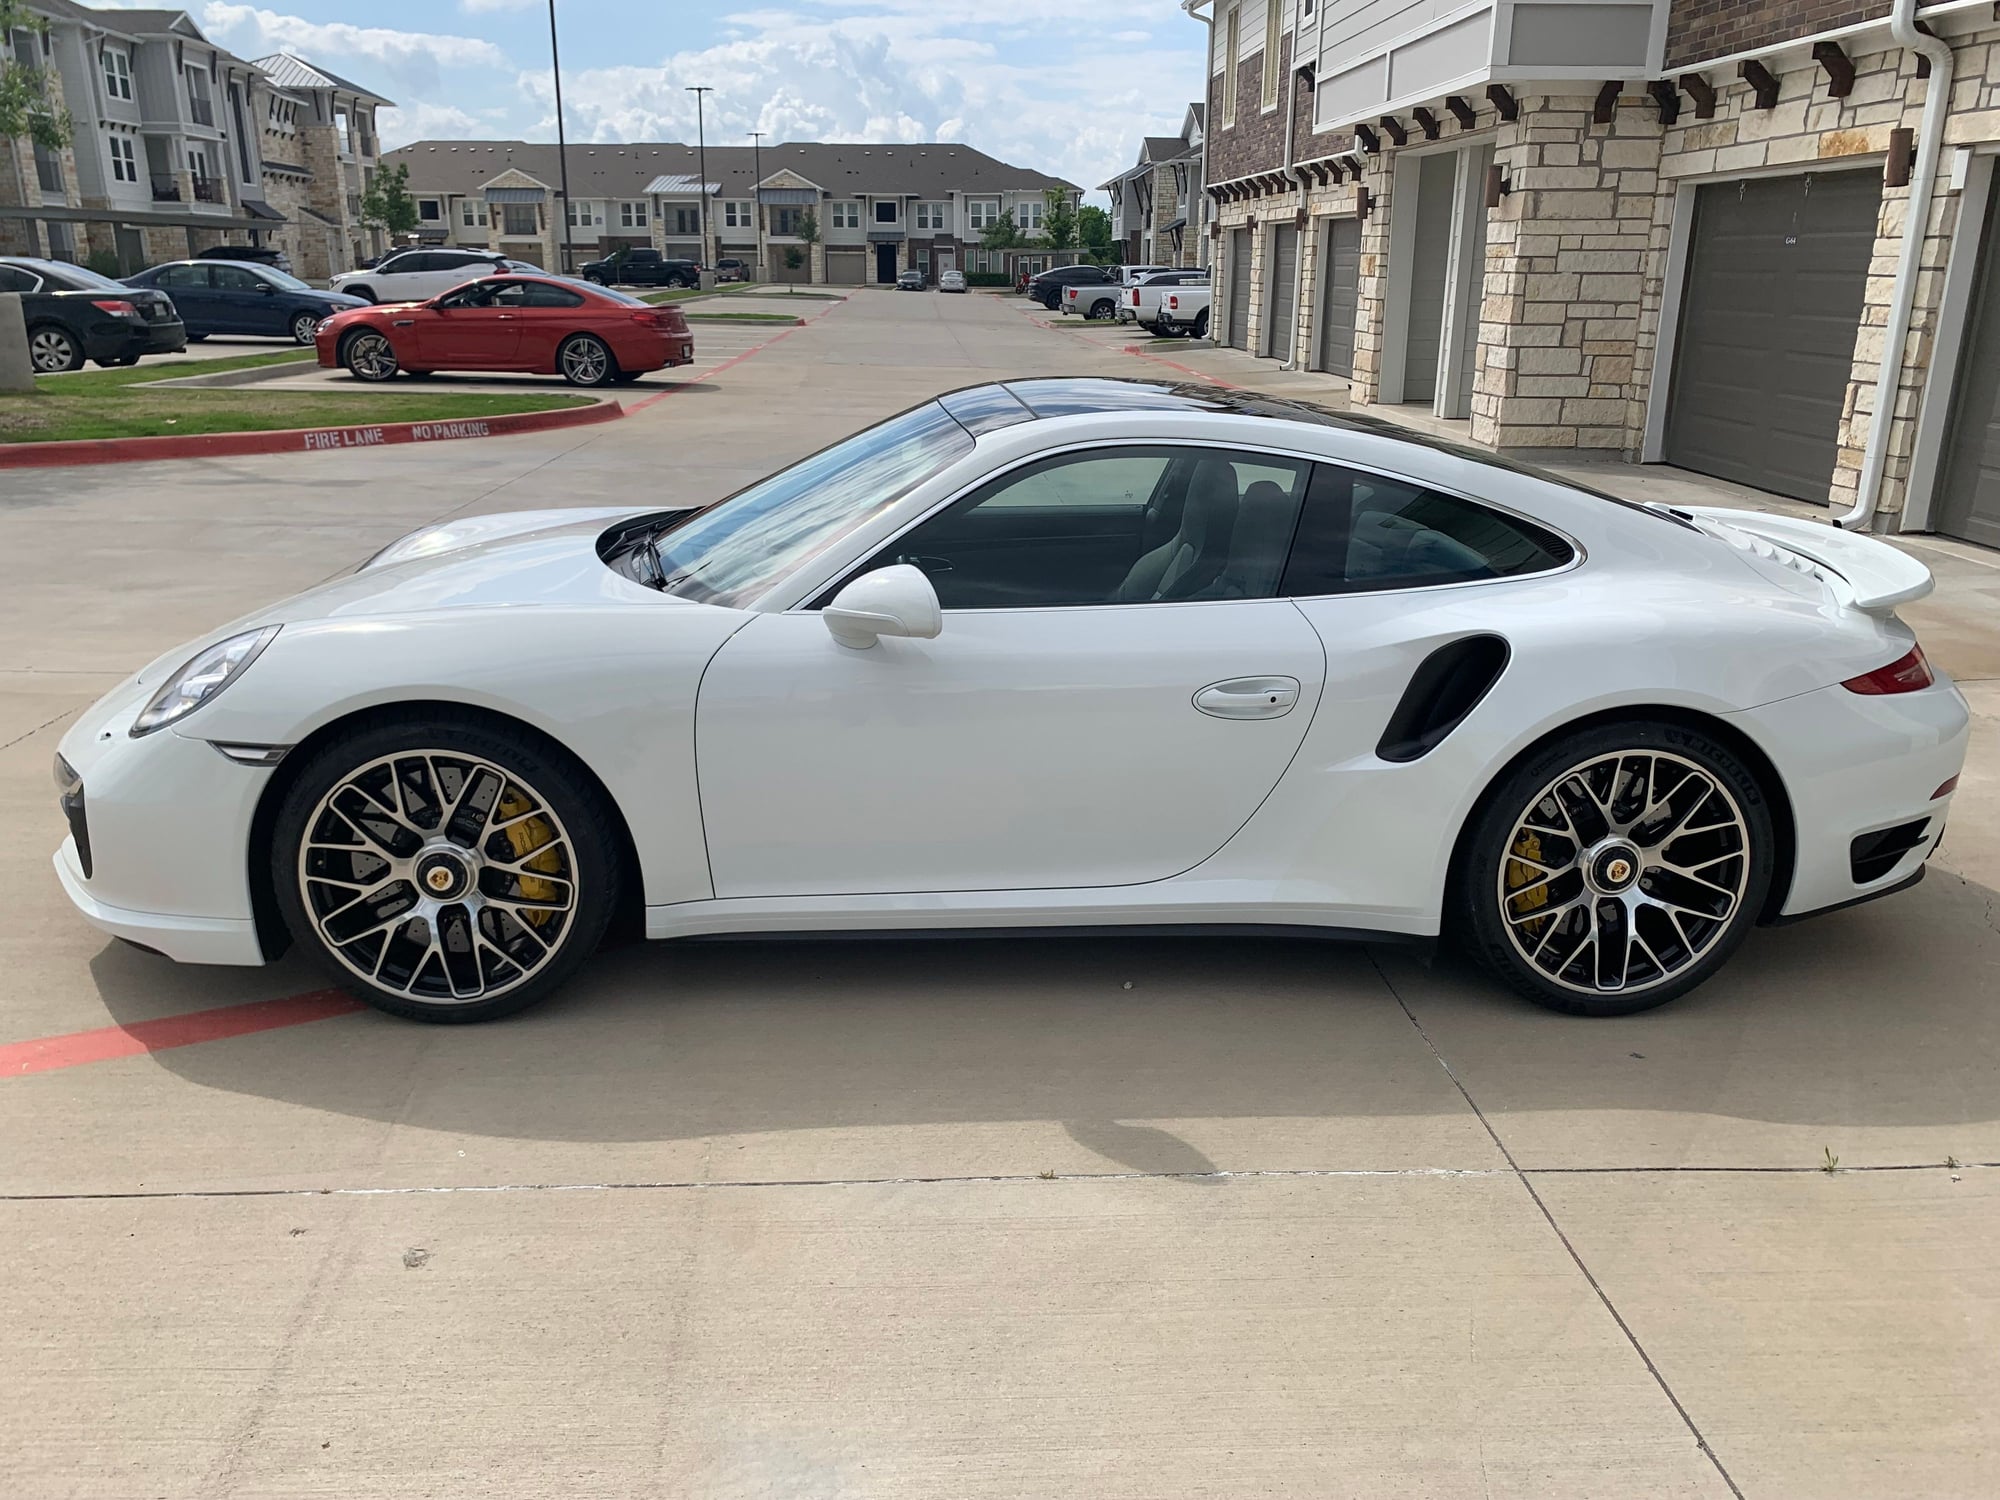 2014 Porsche 911 - 2014 TTS with 9,450 miles - Used - VIN WP0AD2A94ES167720 - 6 cyl - AWD - Automatic - Coupe - White - Rockwall, TX 75087, United States